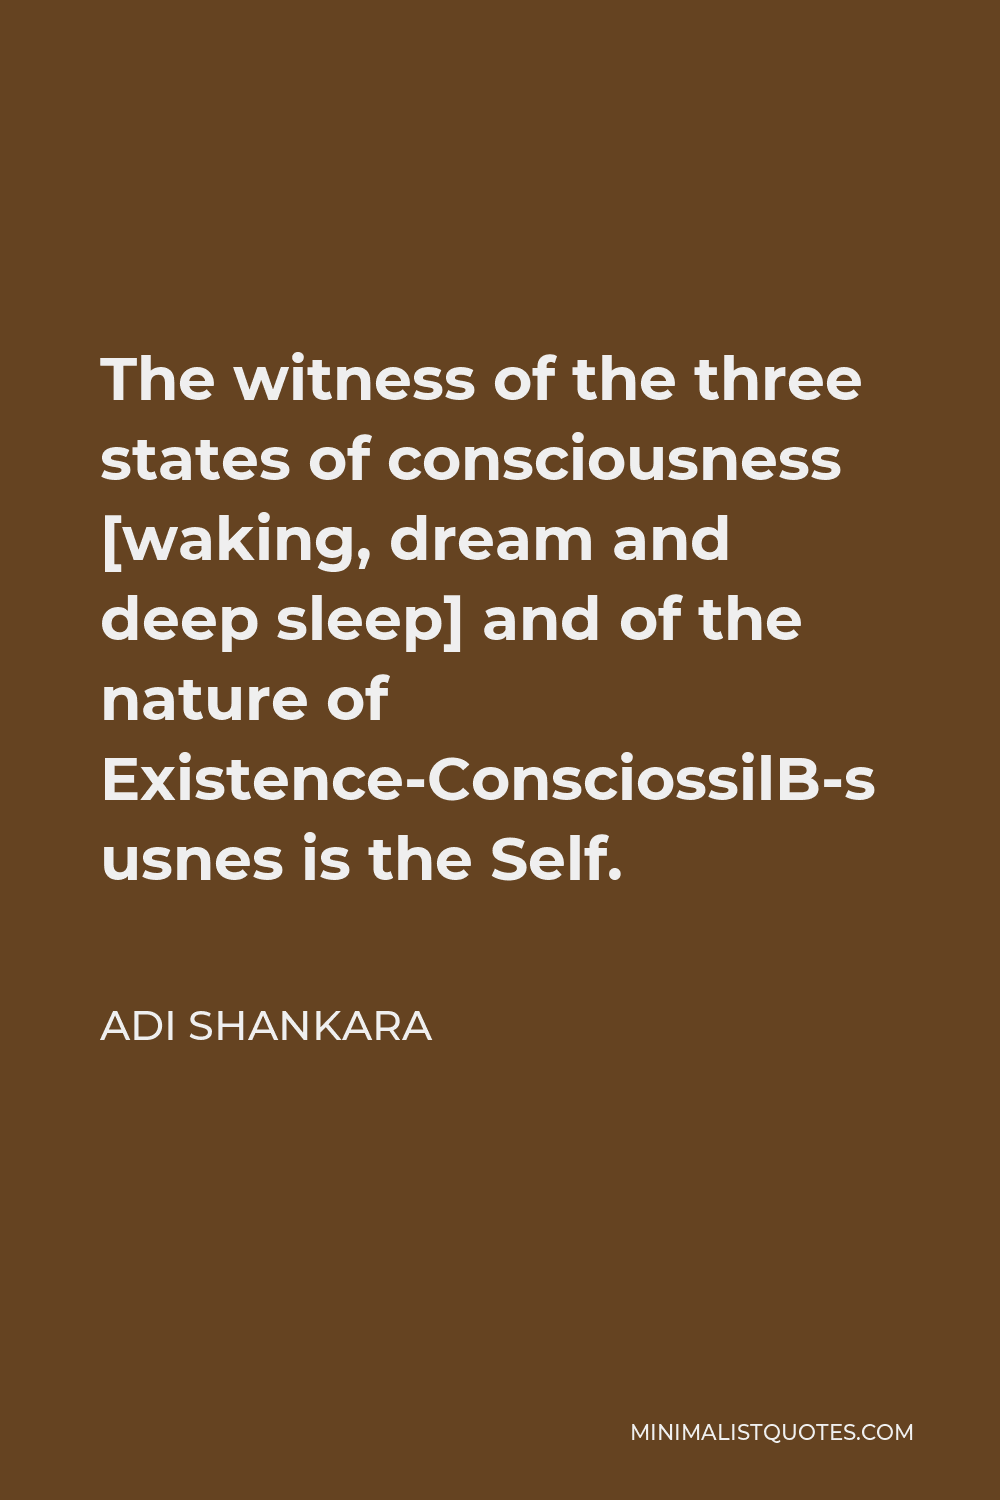 Adi Shankara Quote - The witness of the three states of consciousness [waking, dream and deep sleep] and of the nature of Existence-Consciousness-Bliss is the Self.